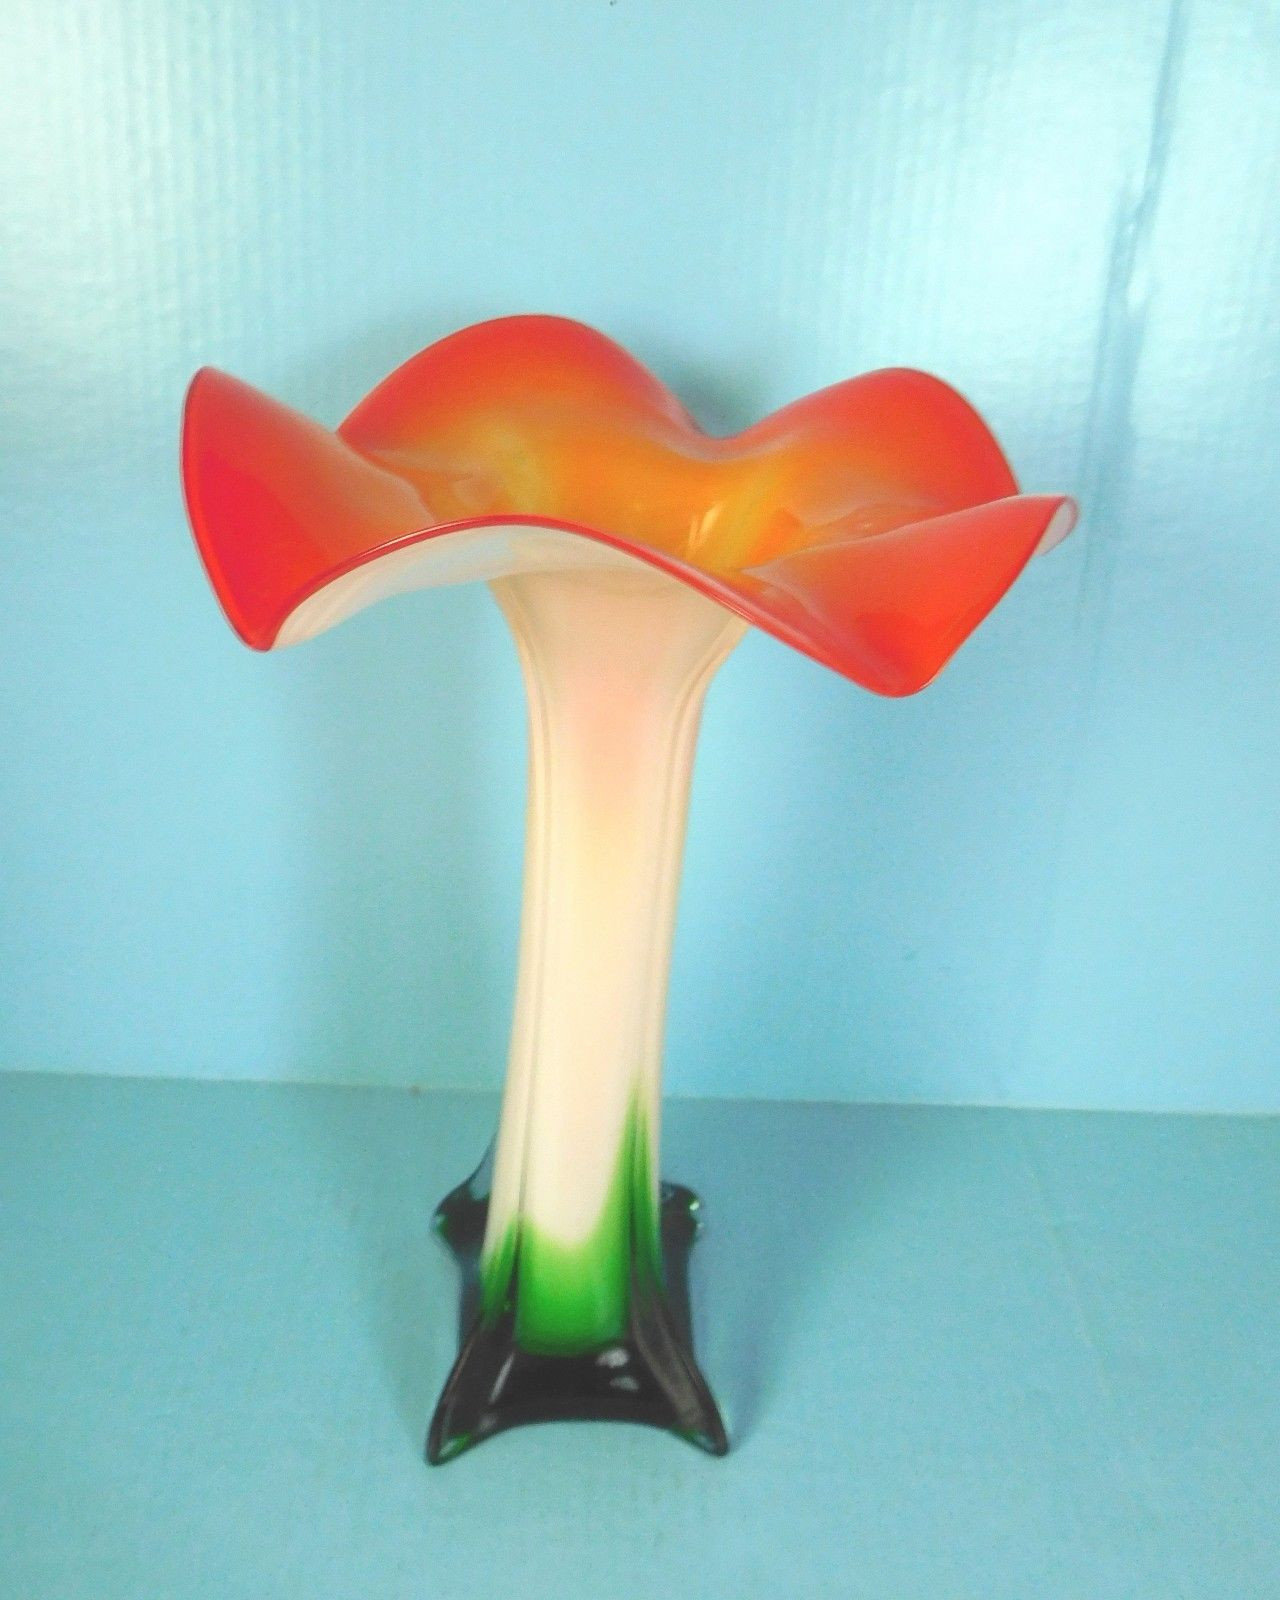 17 Stylish Lenox Crystal Star Vase 2022 free download lenox crystal star vase of flower petal retro art glass vase 14 25 tall poppy red green regarding 1 of 8 see more